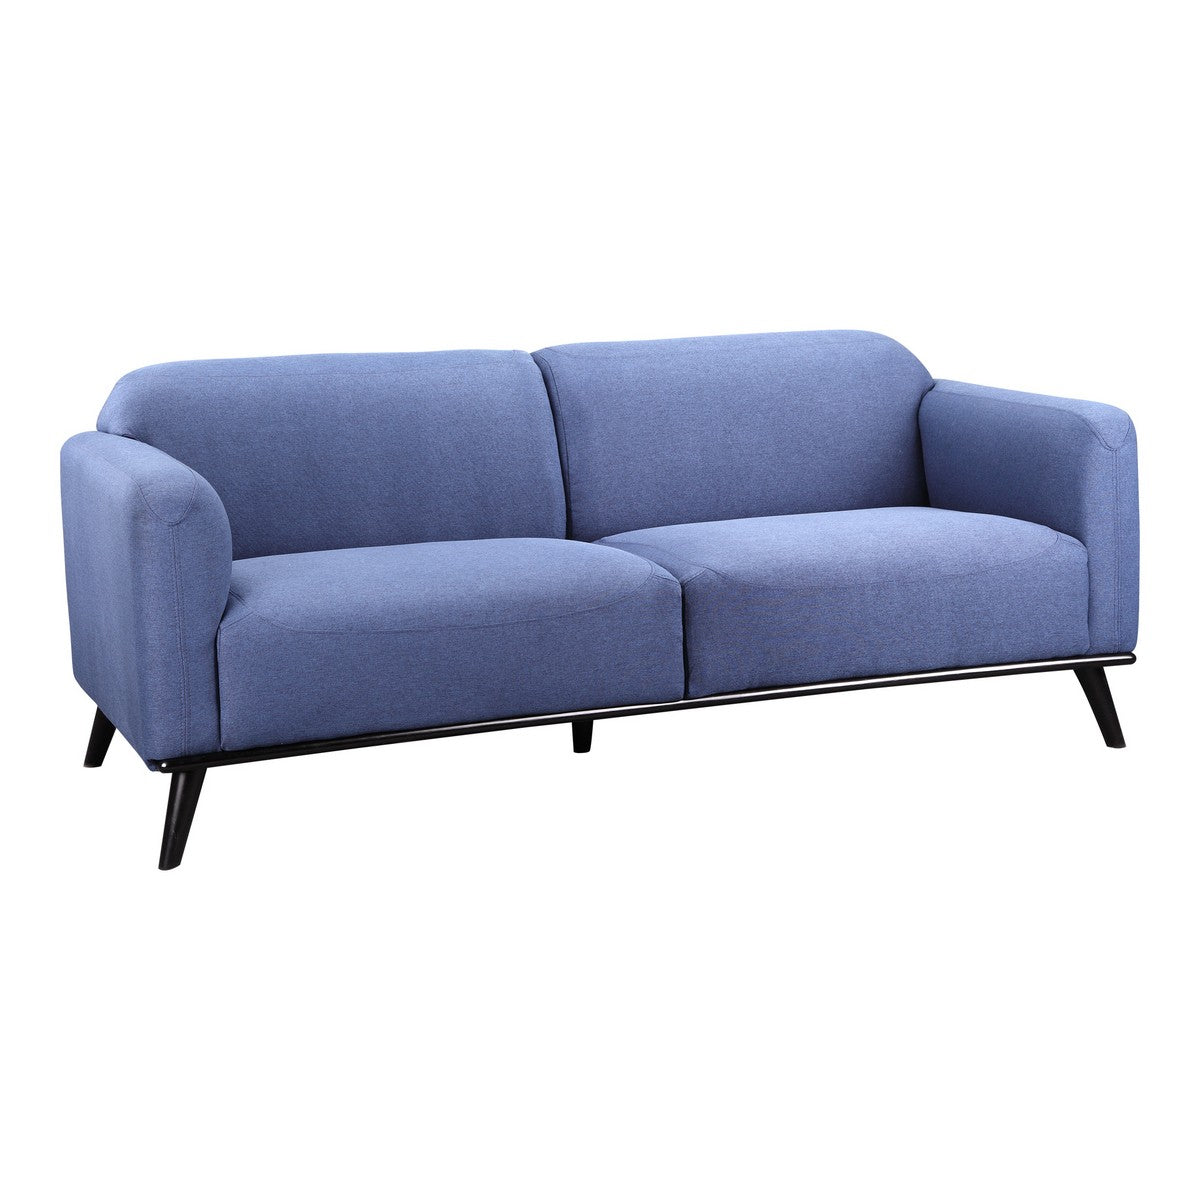 Moe's Home Collection Peppy Sofa Blue - FW-1006-26